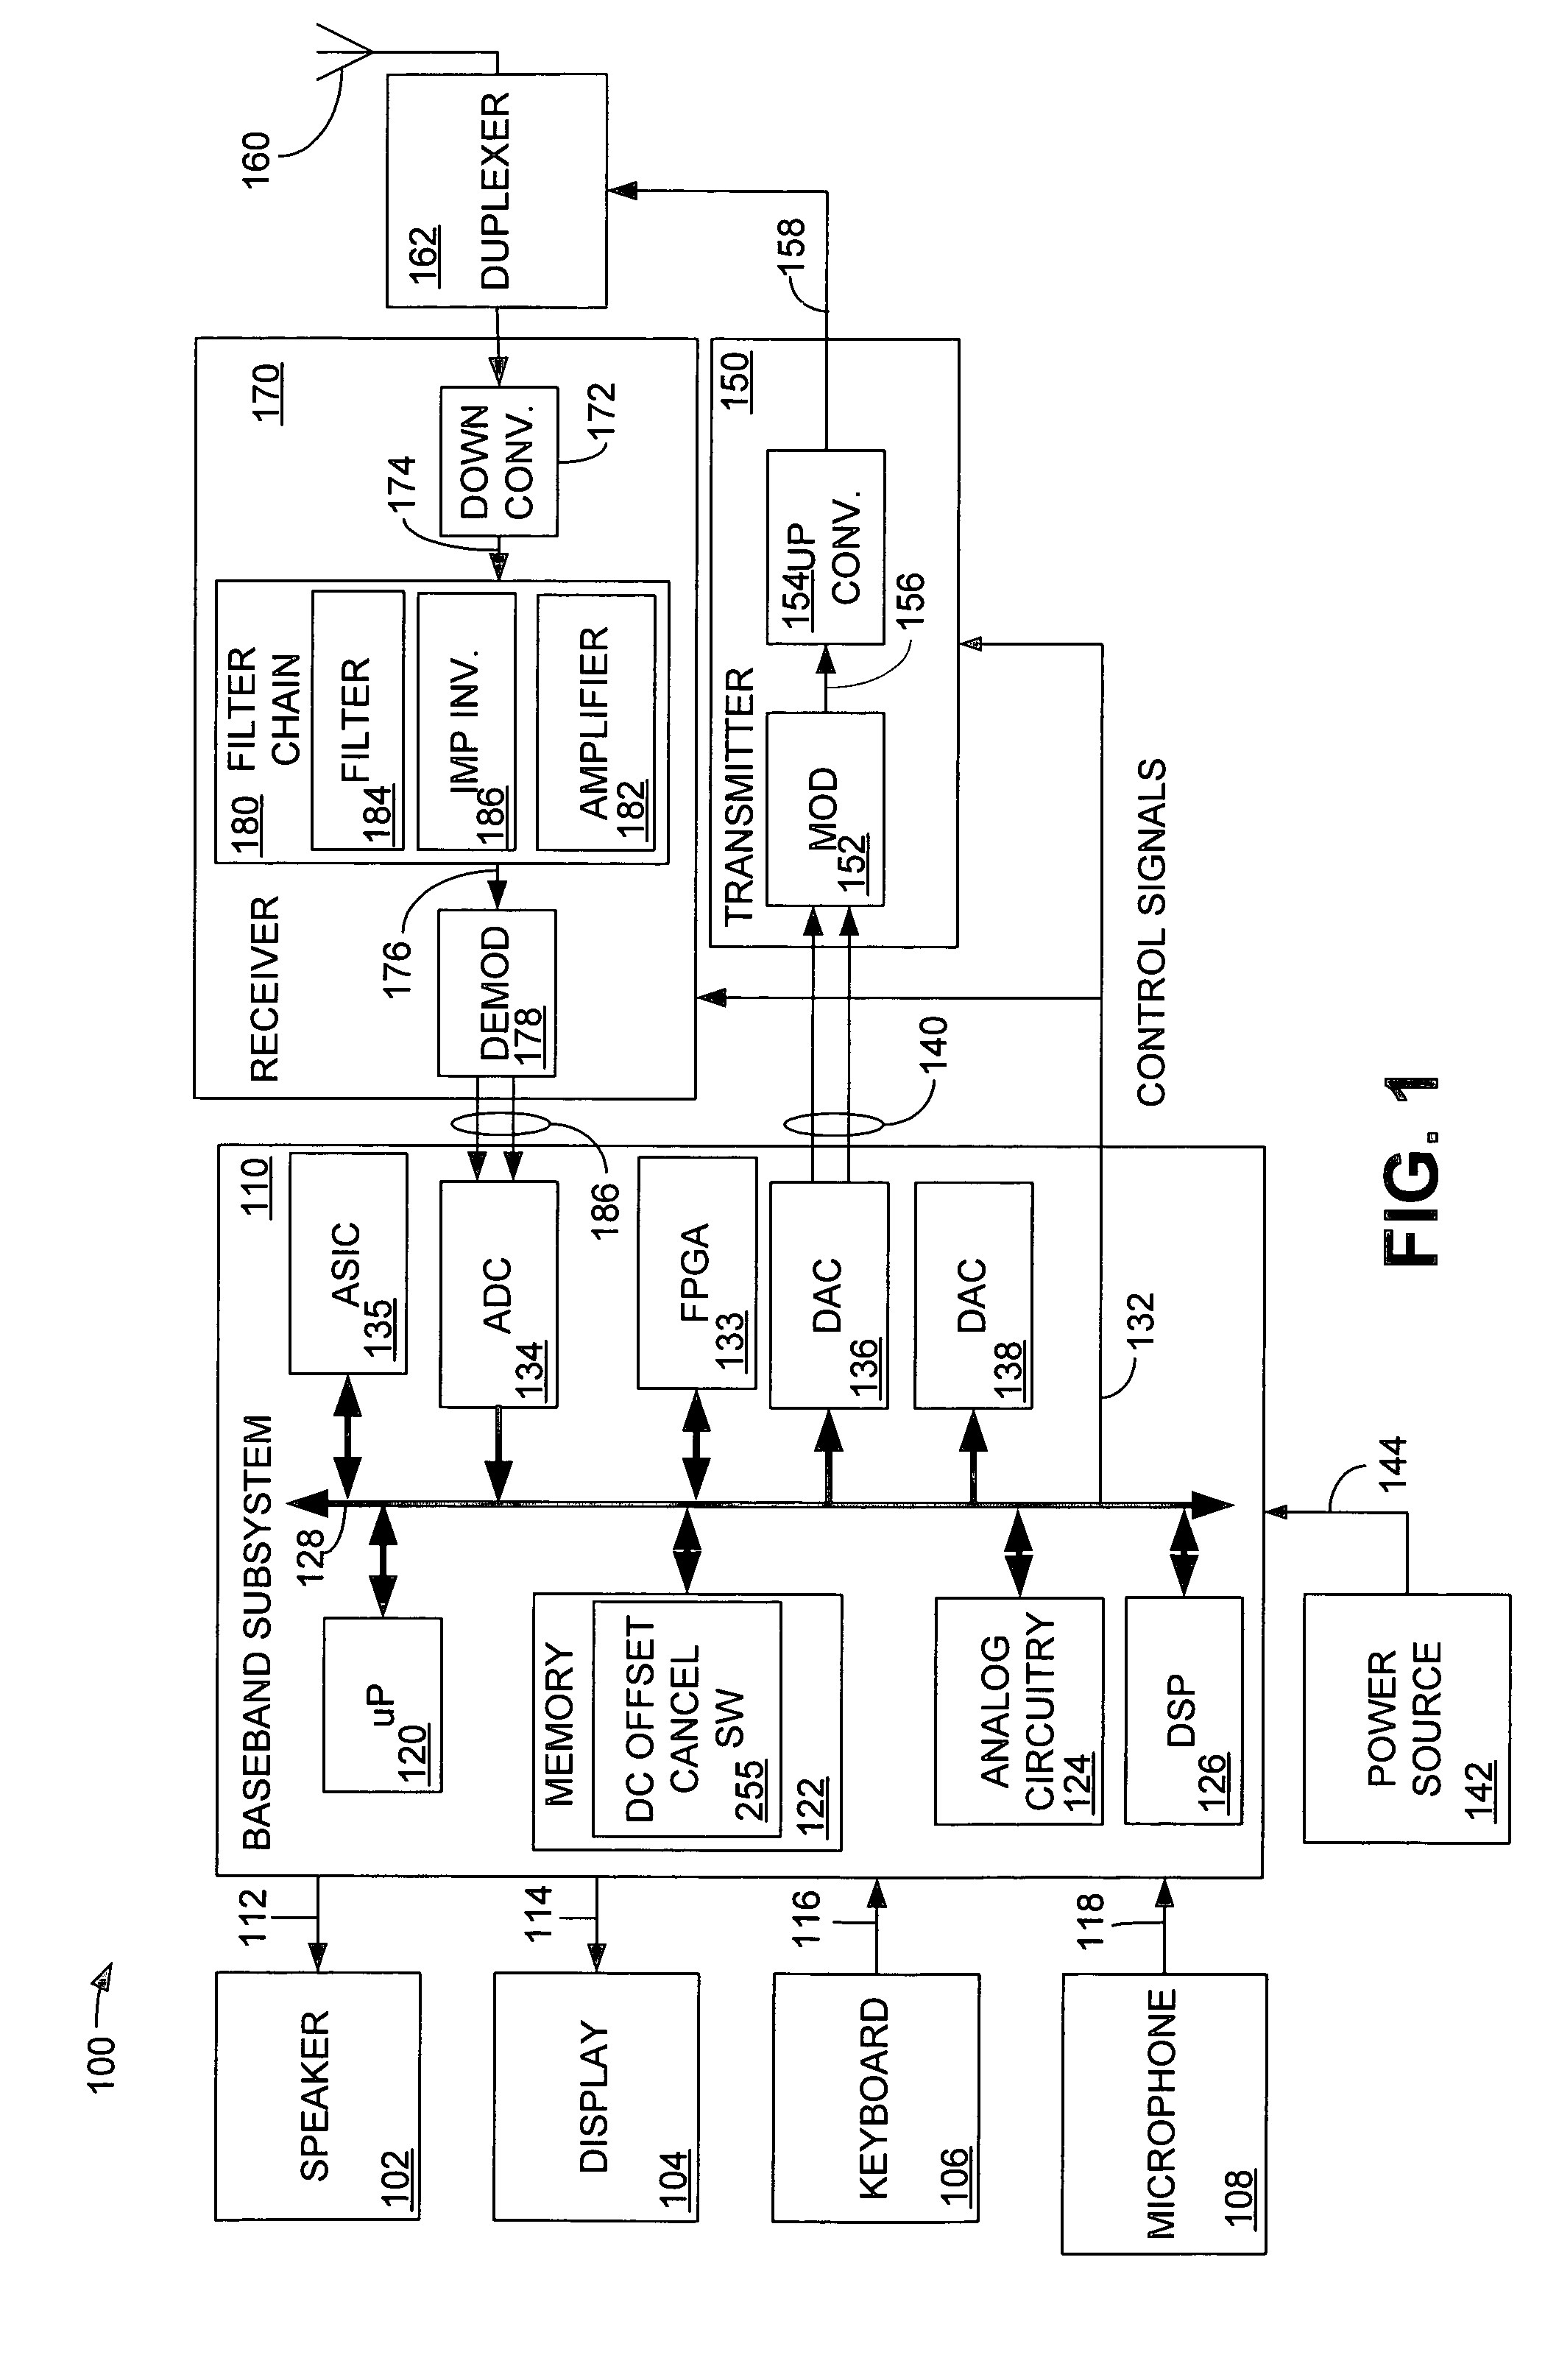 DC offset cancellation in a wireless receiver